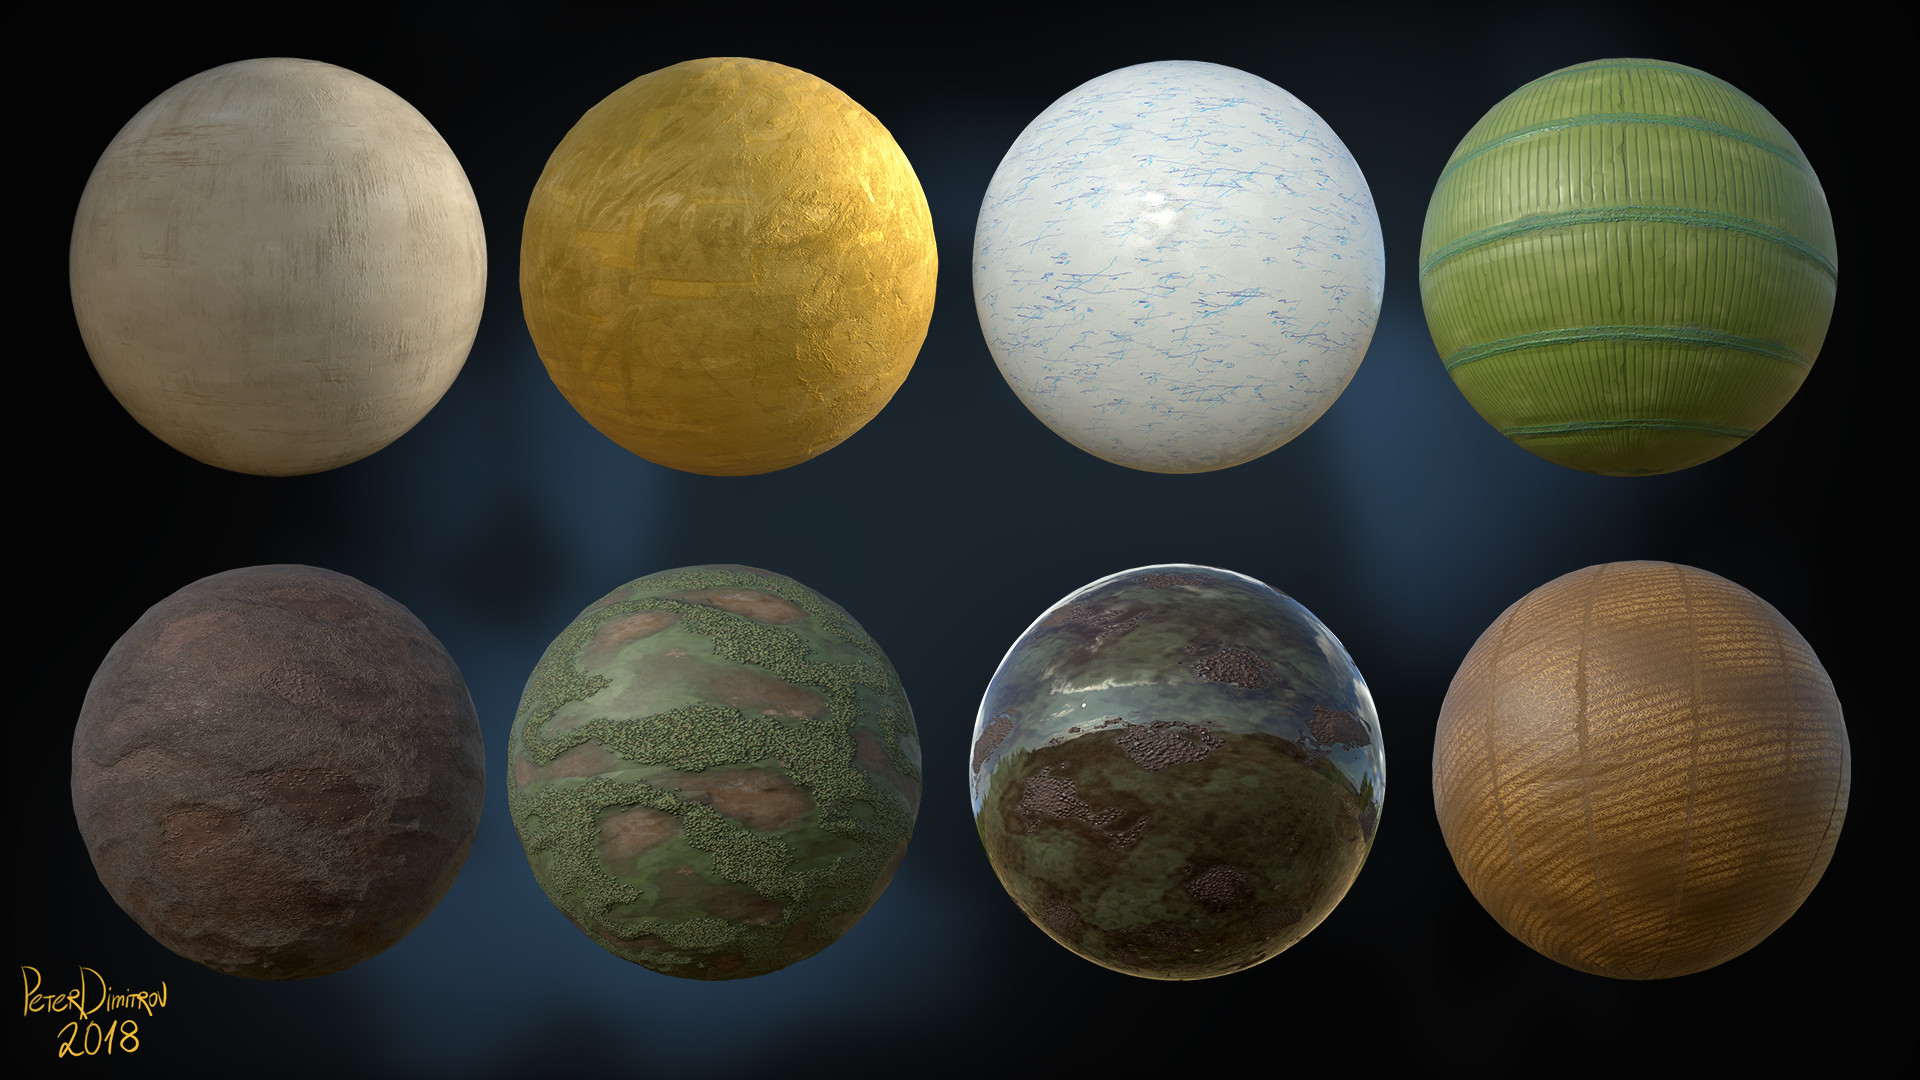 Screenshot showcasing 8 Substance materials rendered on UV spheres. Paper, gold, porcelain, bamboo, ground mud, ground mud with moss, ground mud with puddles and final material is haystack.